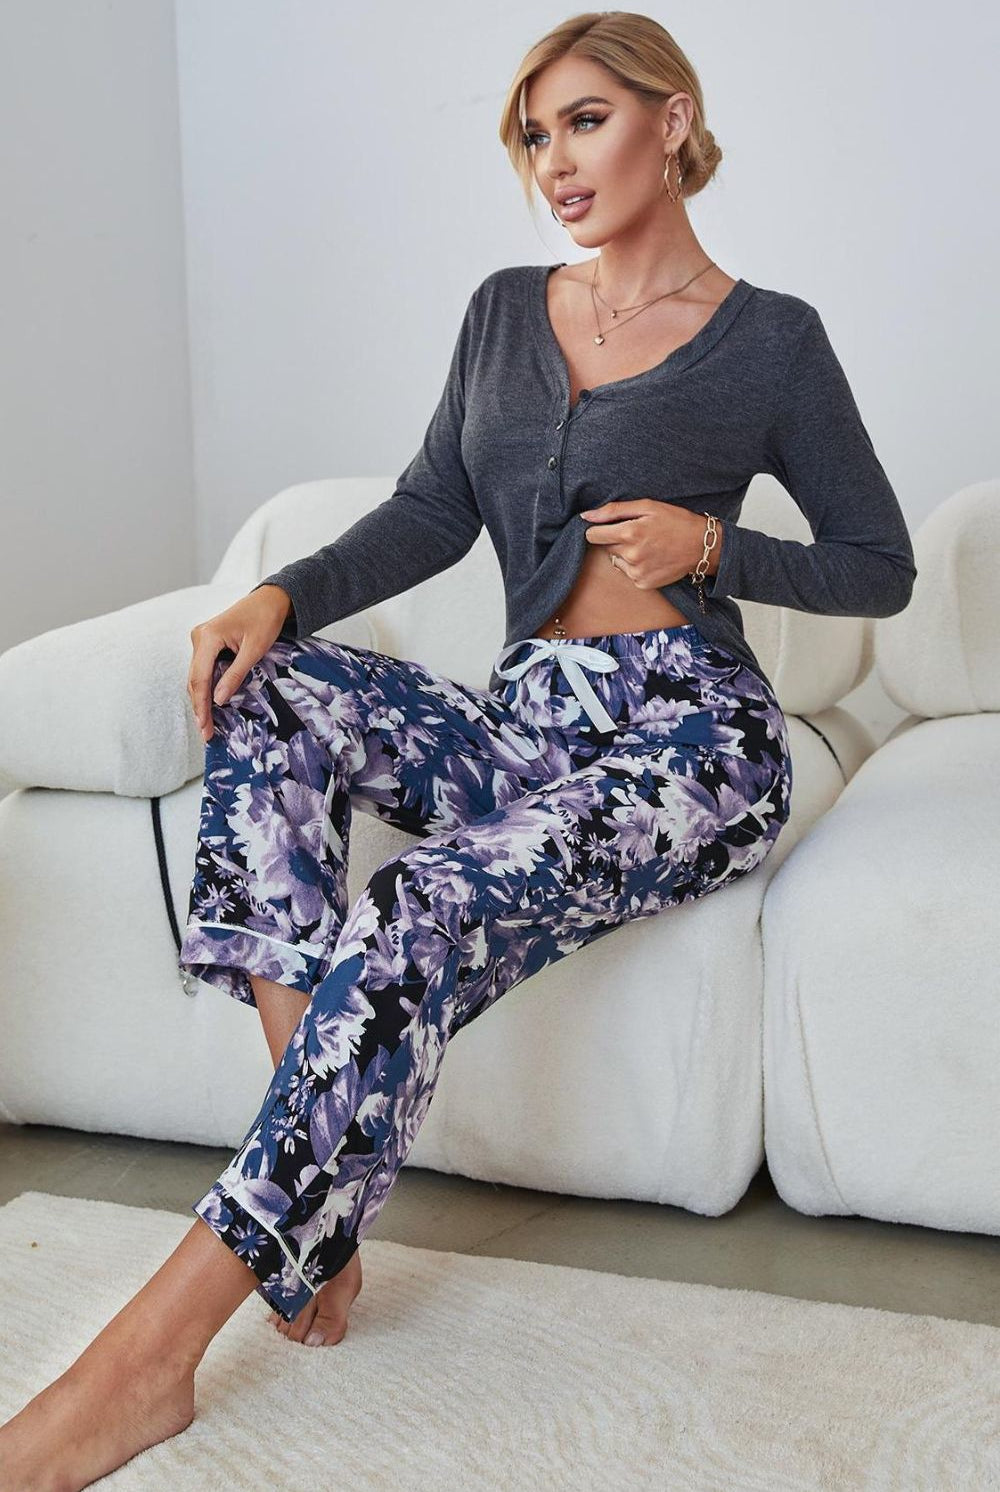 Gray V-Neck Henley Top and Floral Pants Lounge Set Pajamas